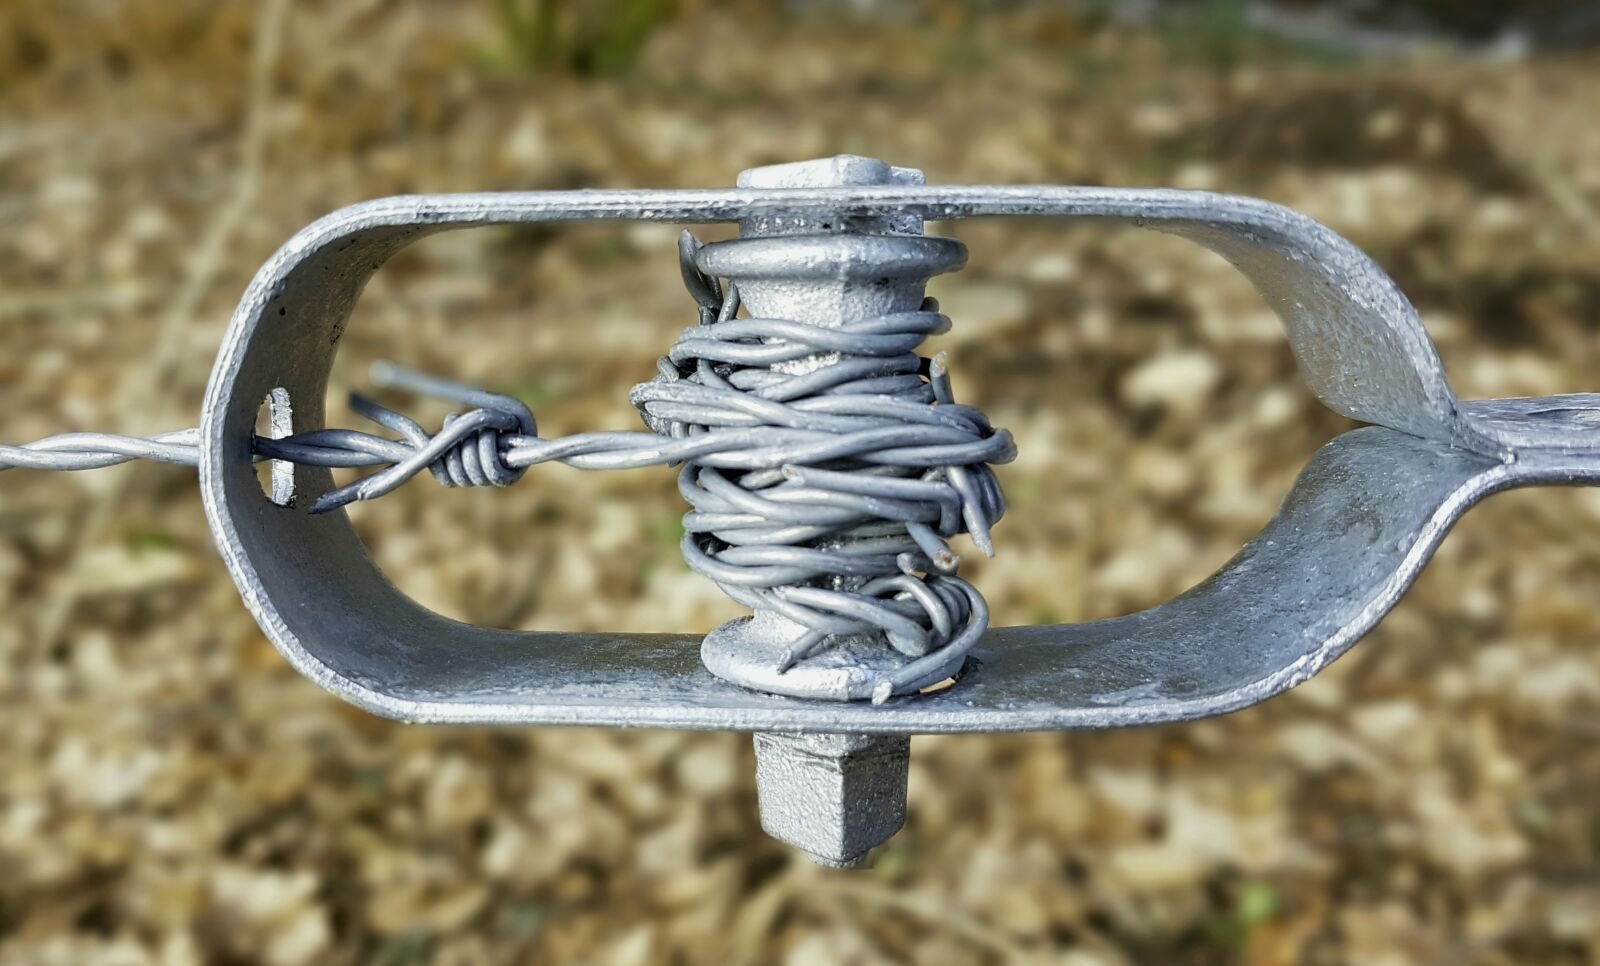 Samsung Galaxy S7 sample photo. Barbed wire, fence, fencing photography